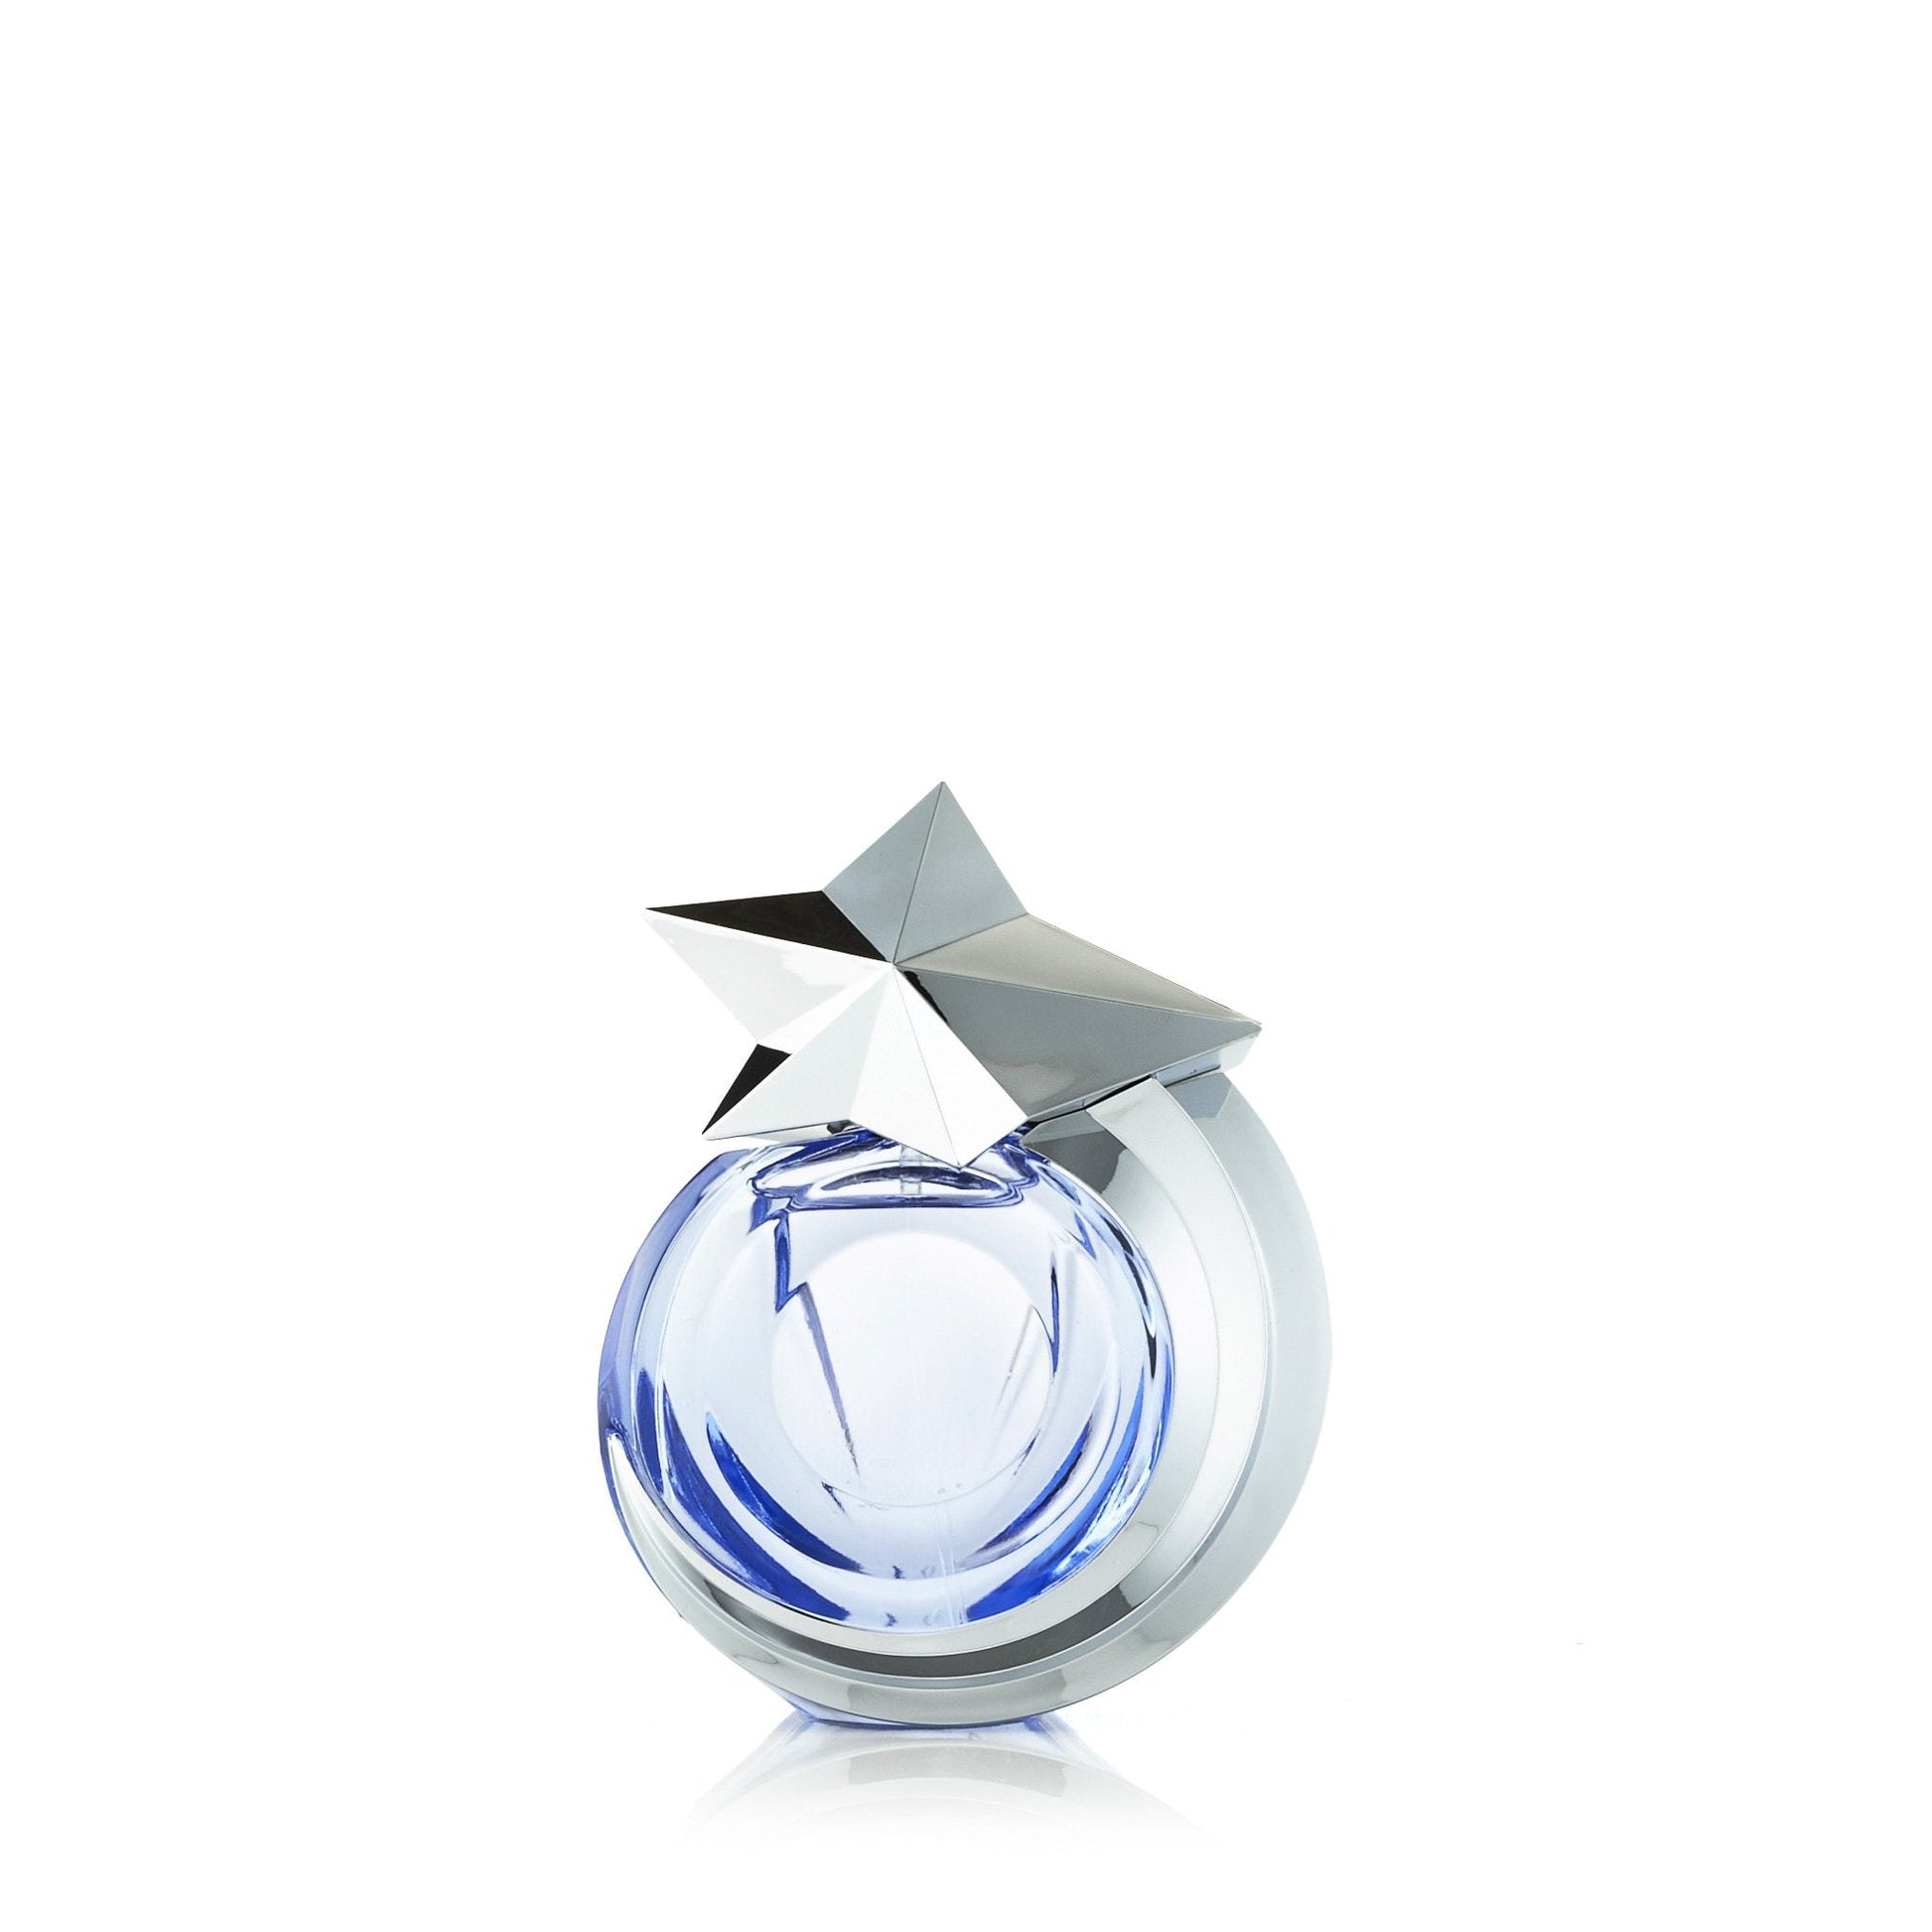 Angel Refillable Eau de Toilette Spray for Women by Thierry Mugler, Product image 2